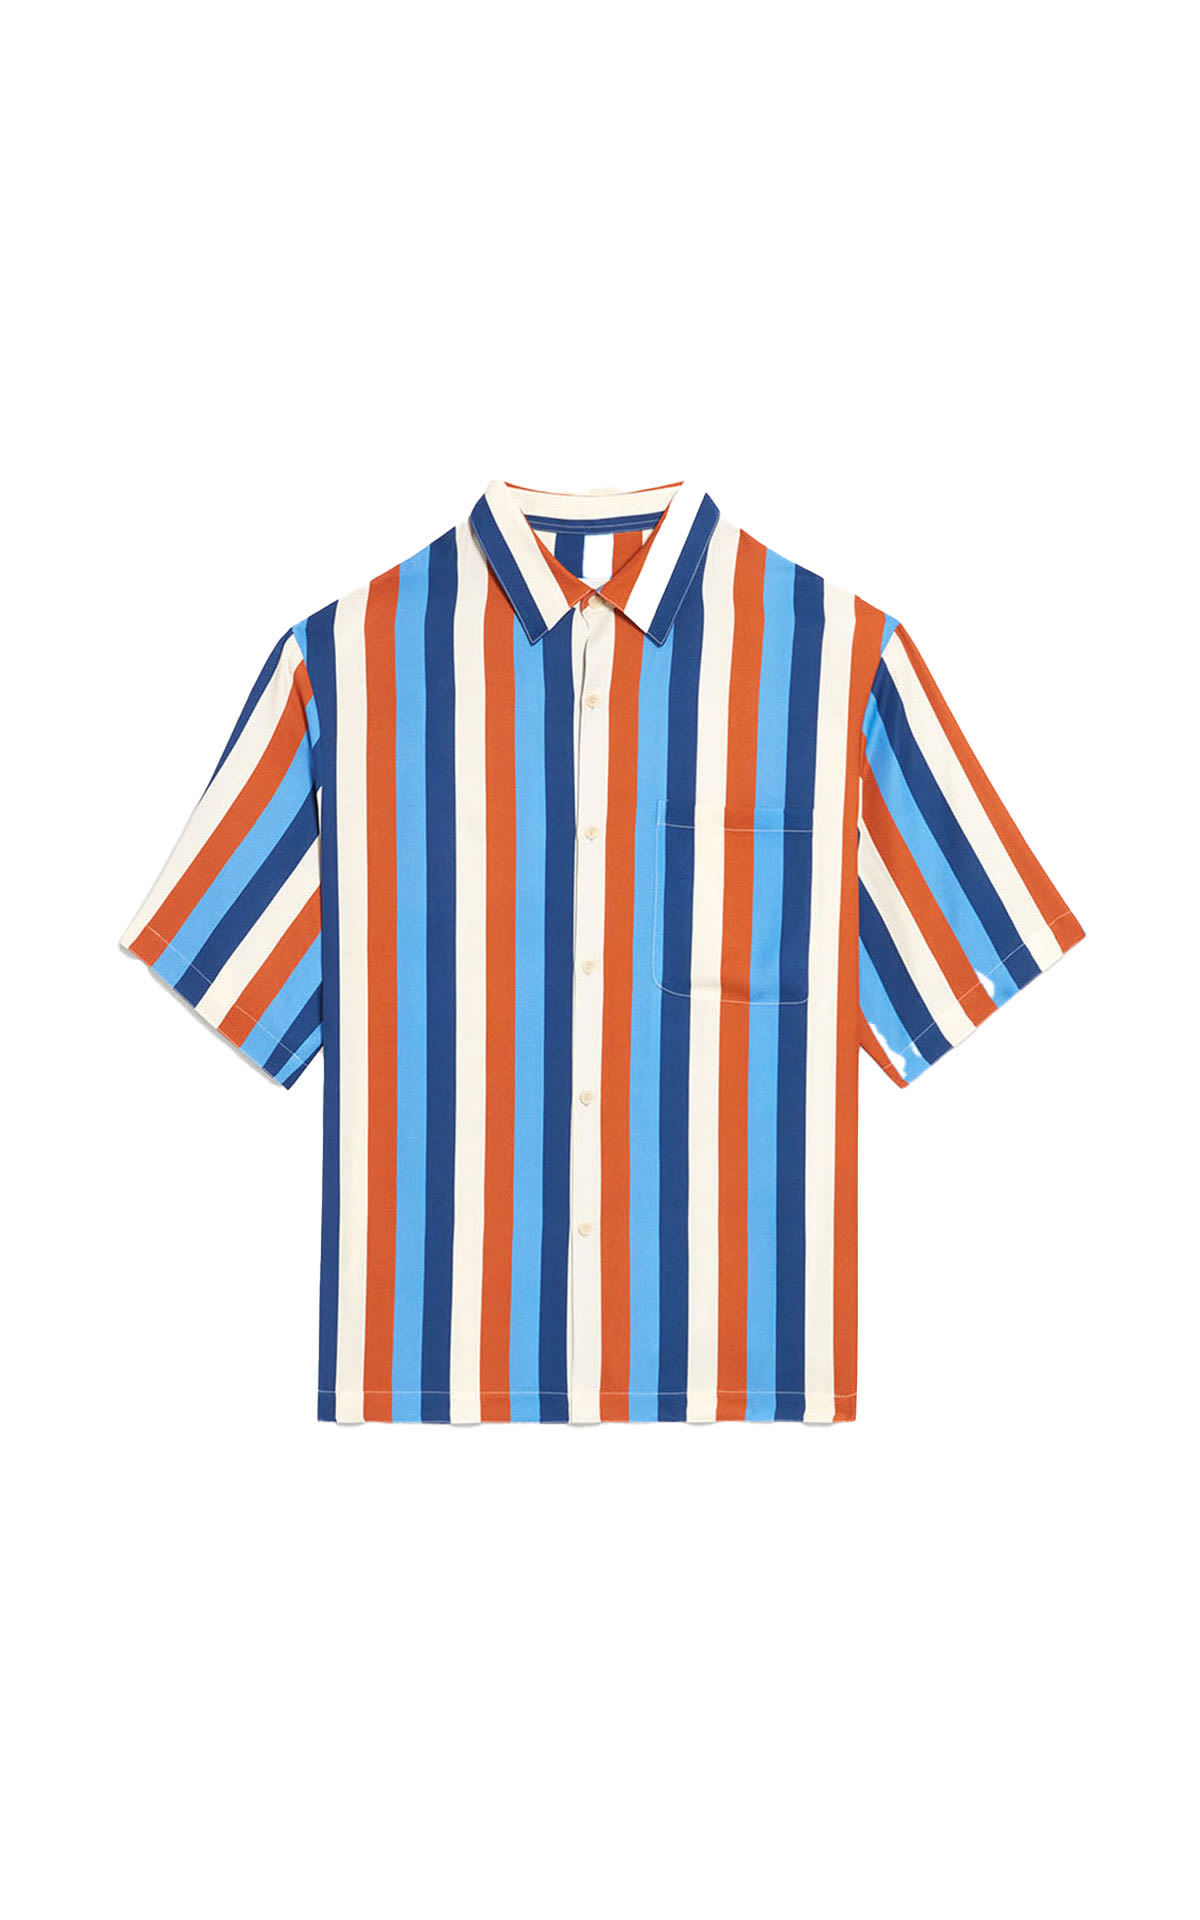 Sandro Striped shirt from Bicester Village